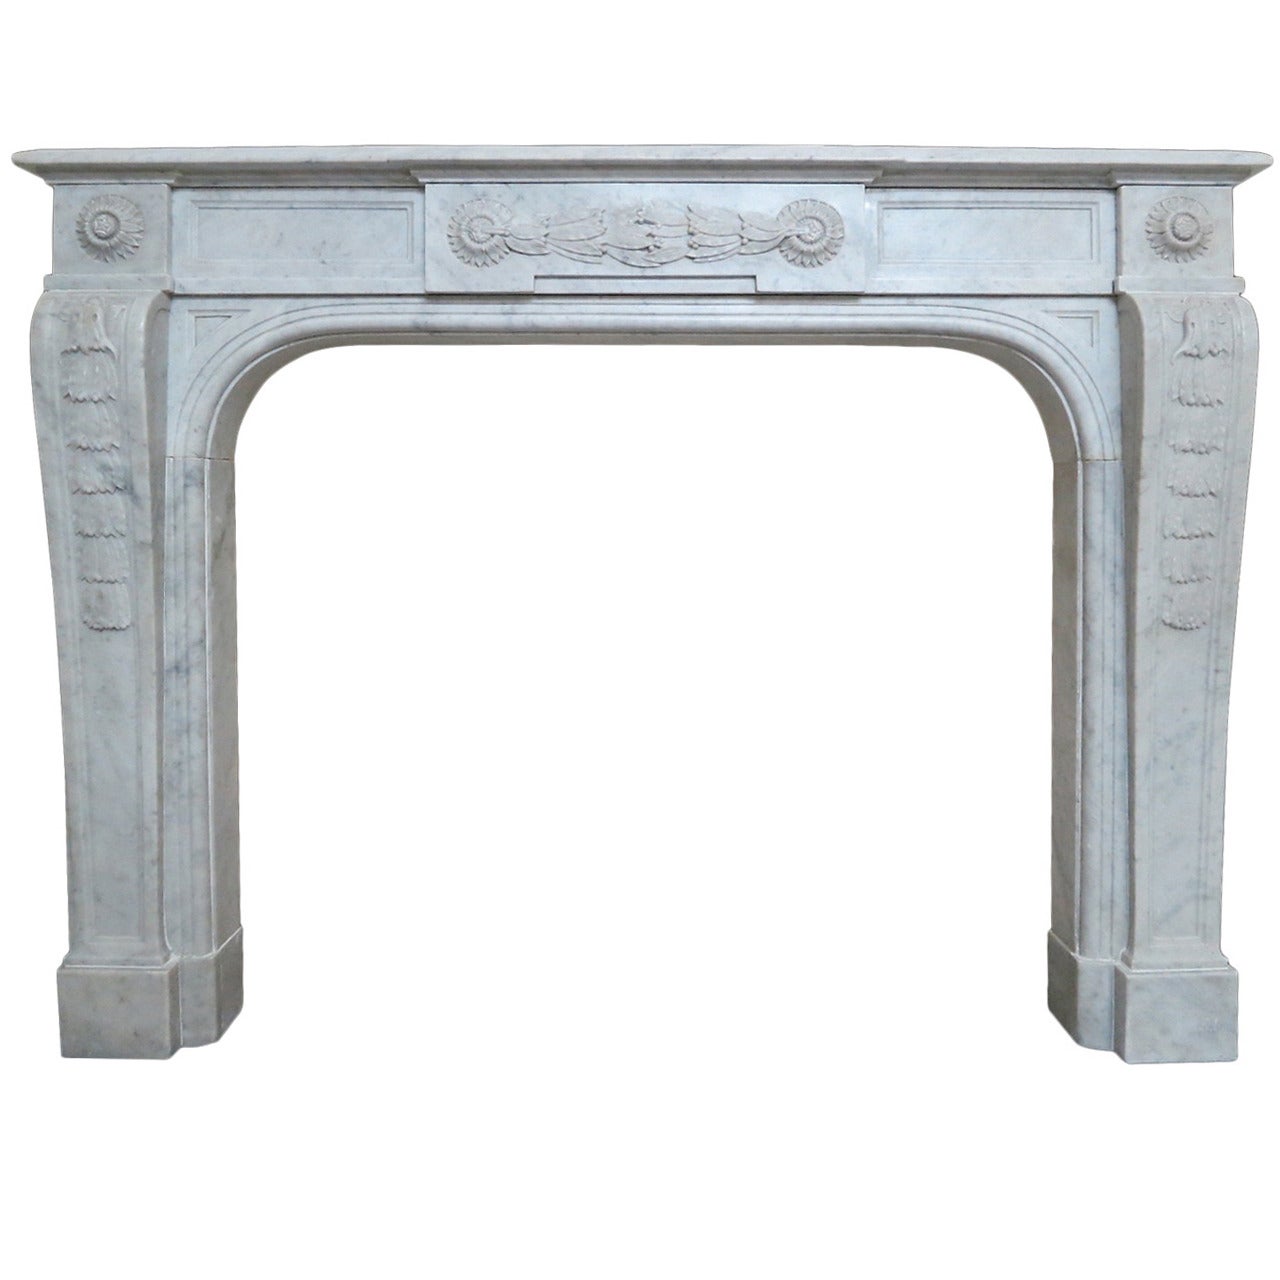 Antique French Louis XVI Style Fireplace Mantel in Carrara Marble